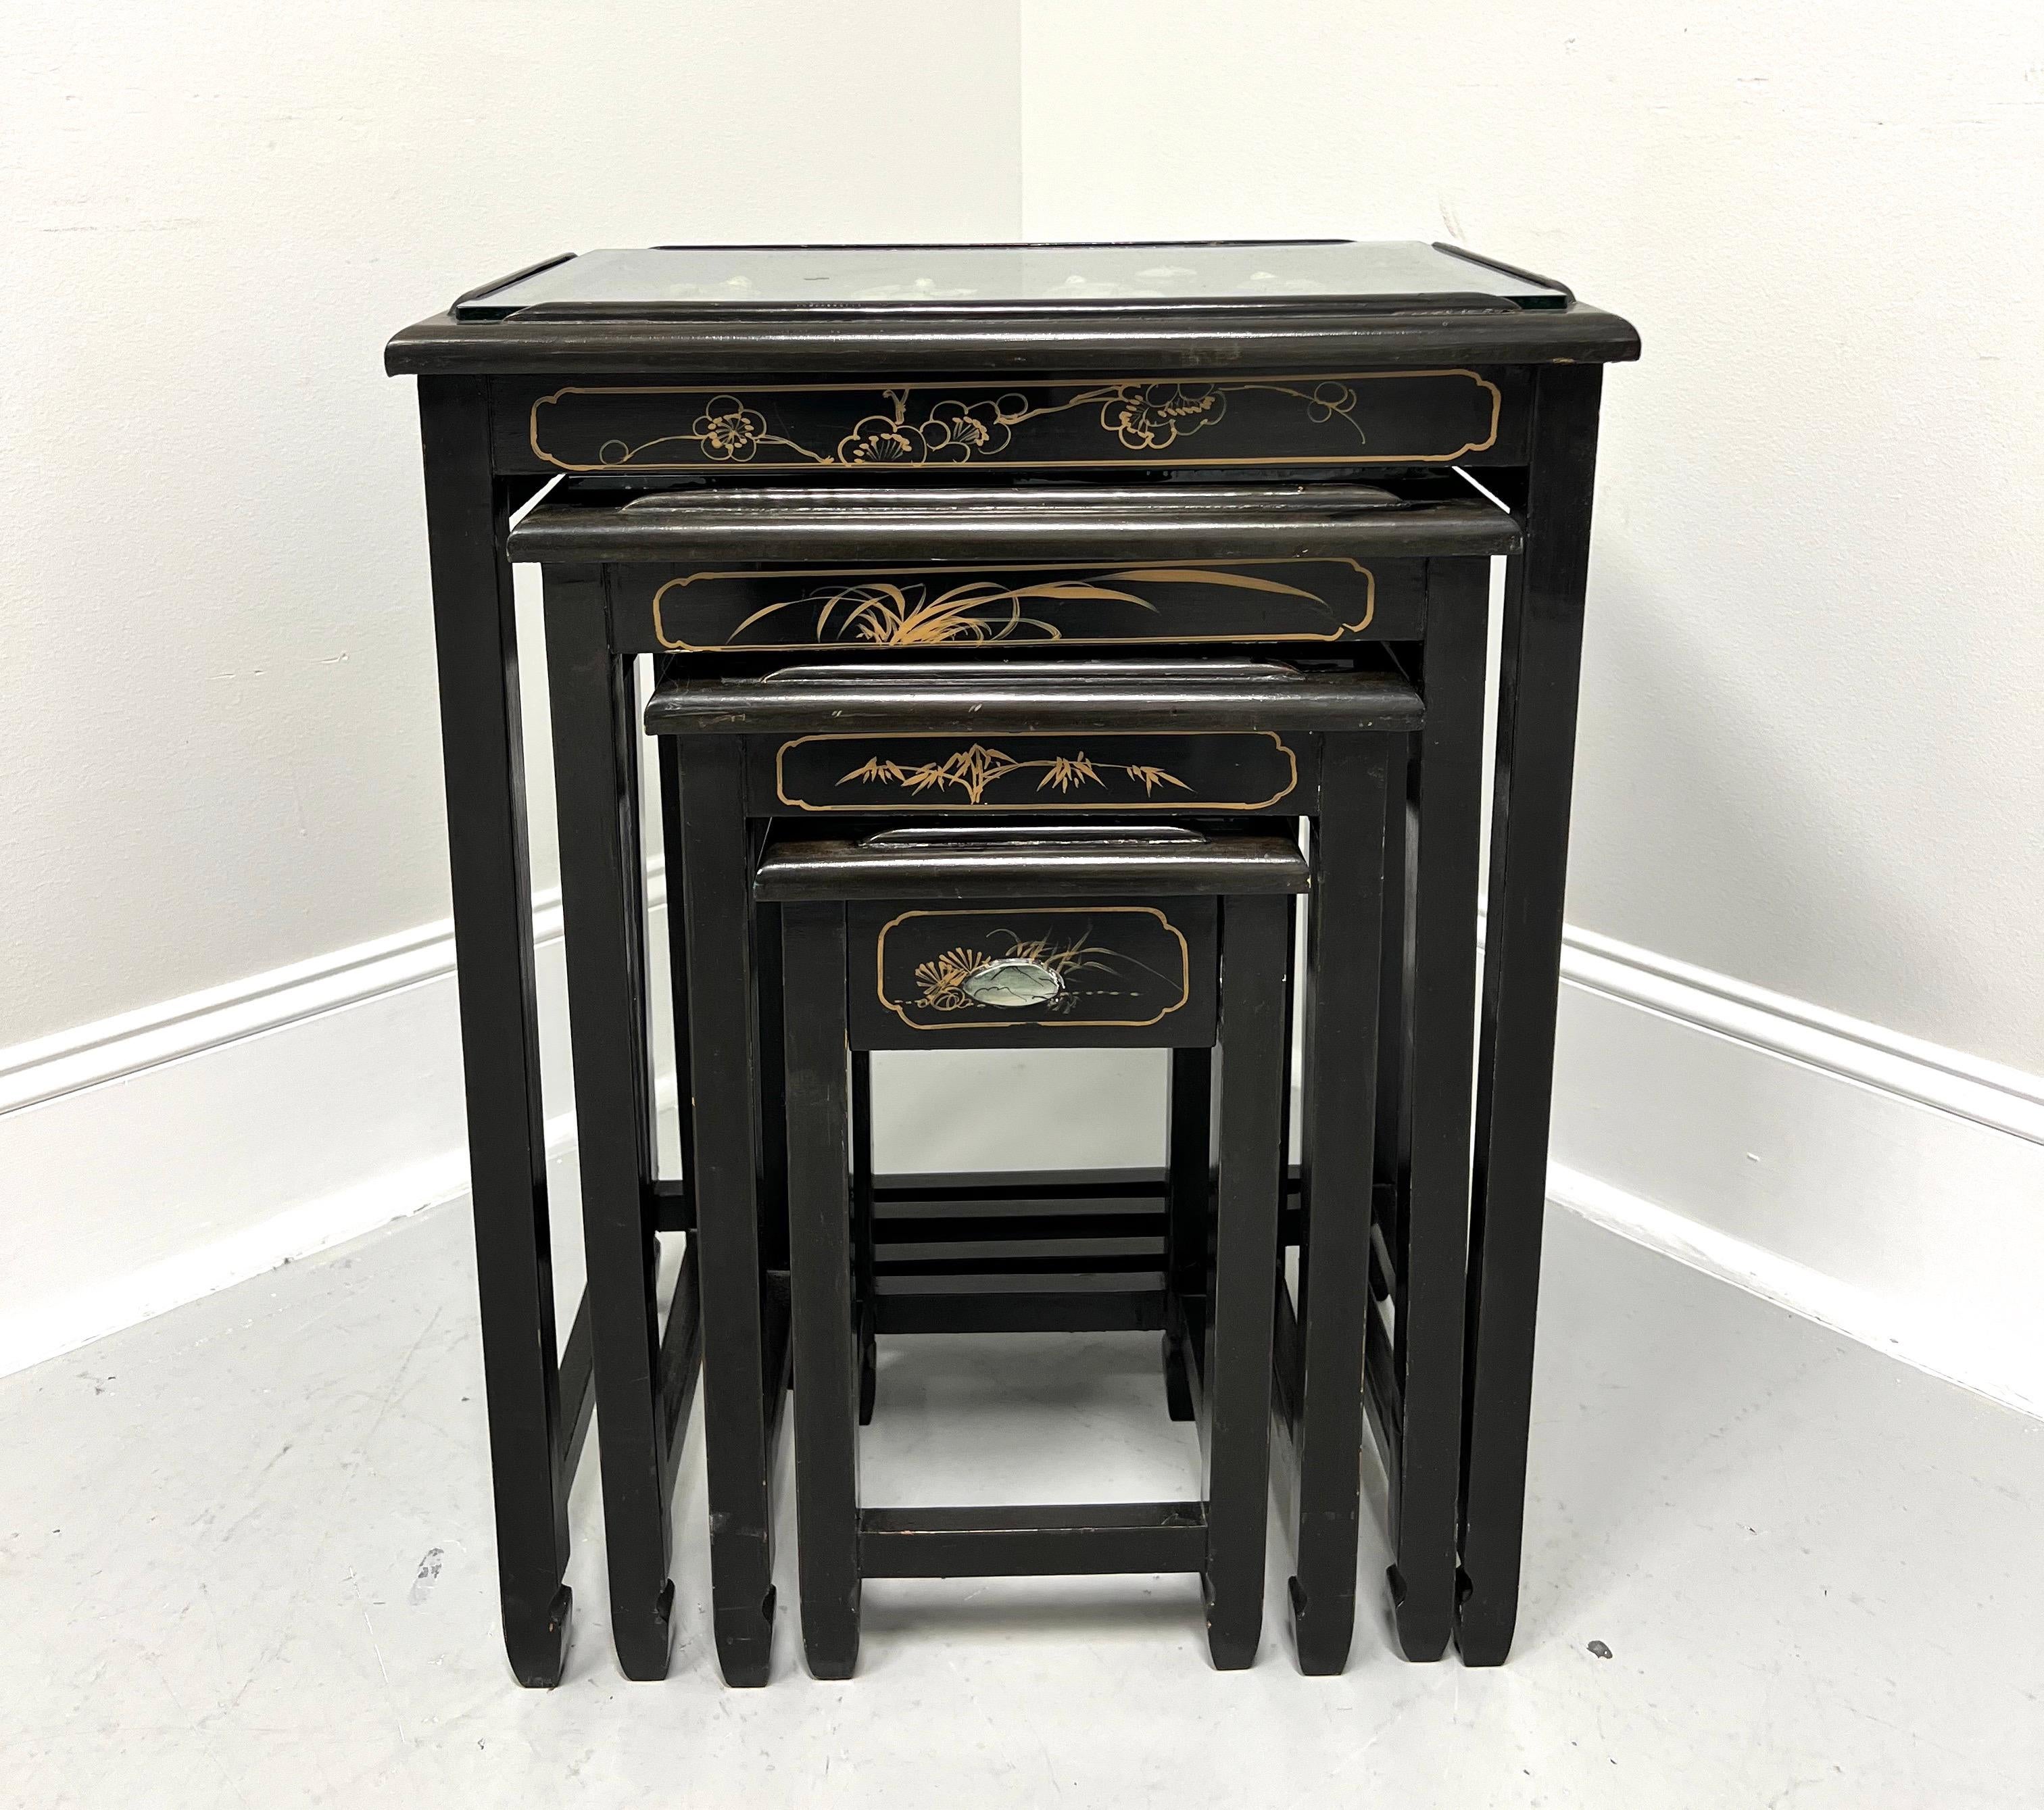 20th Century 1980's Chinese Export Black Lacquer Hand Painted Nesting Tables - Set of 4 For Sale